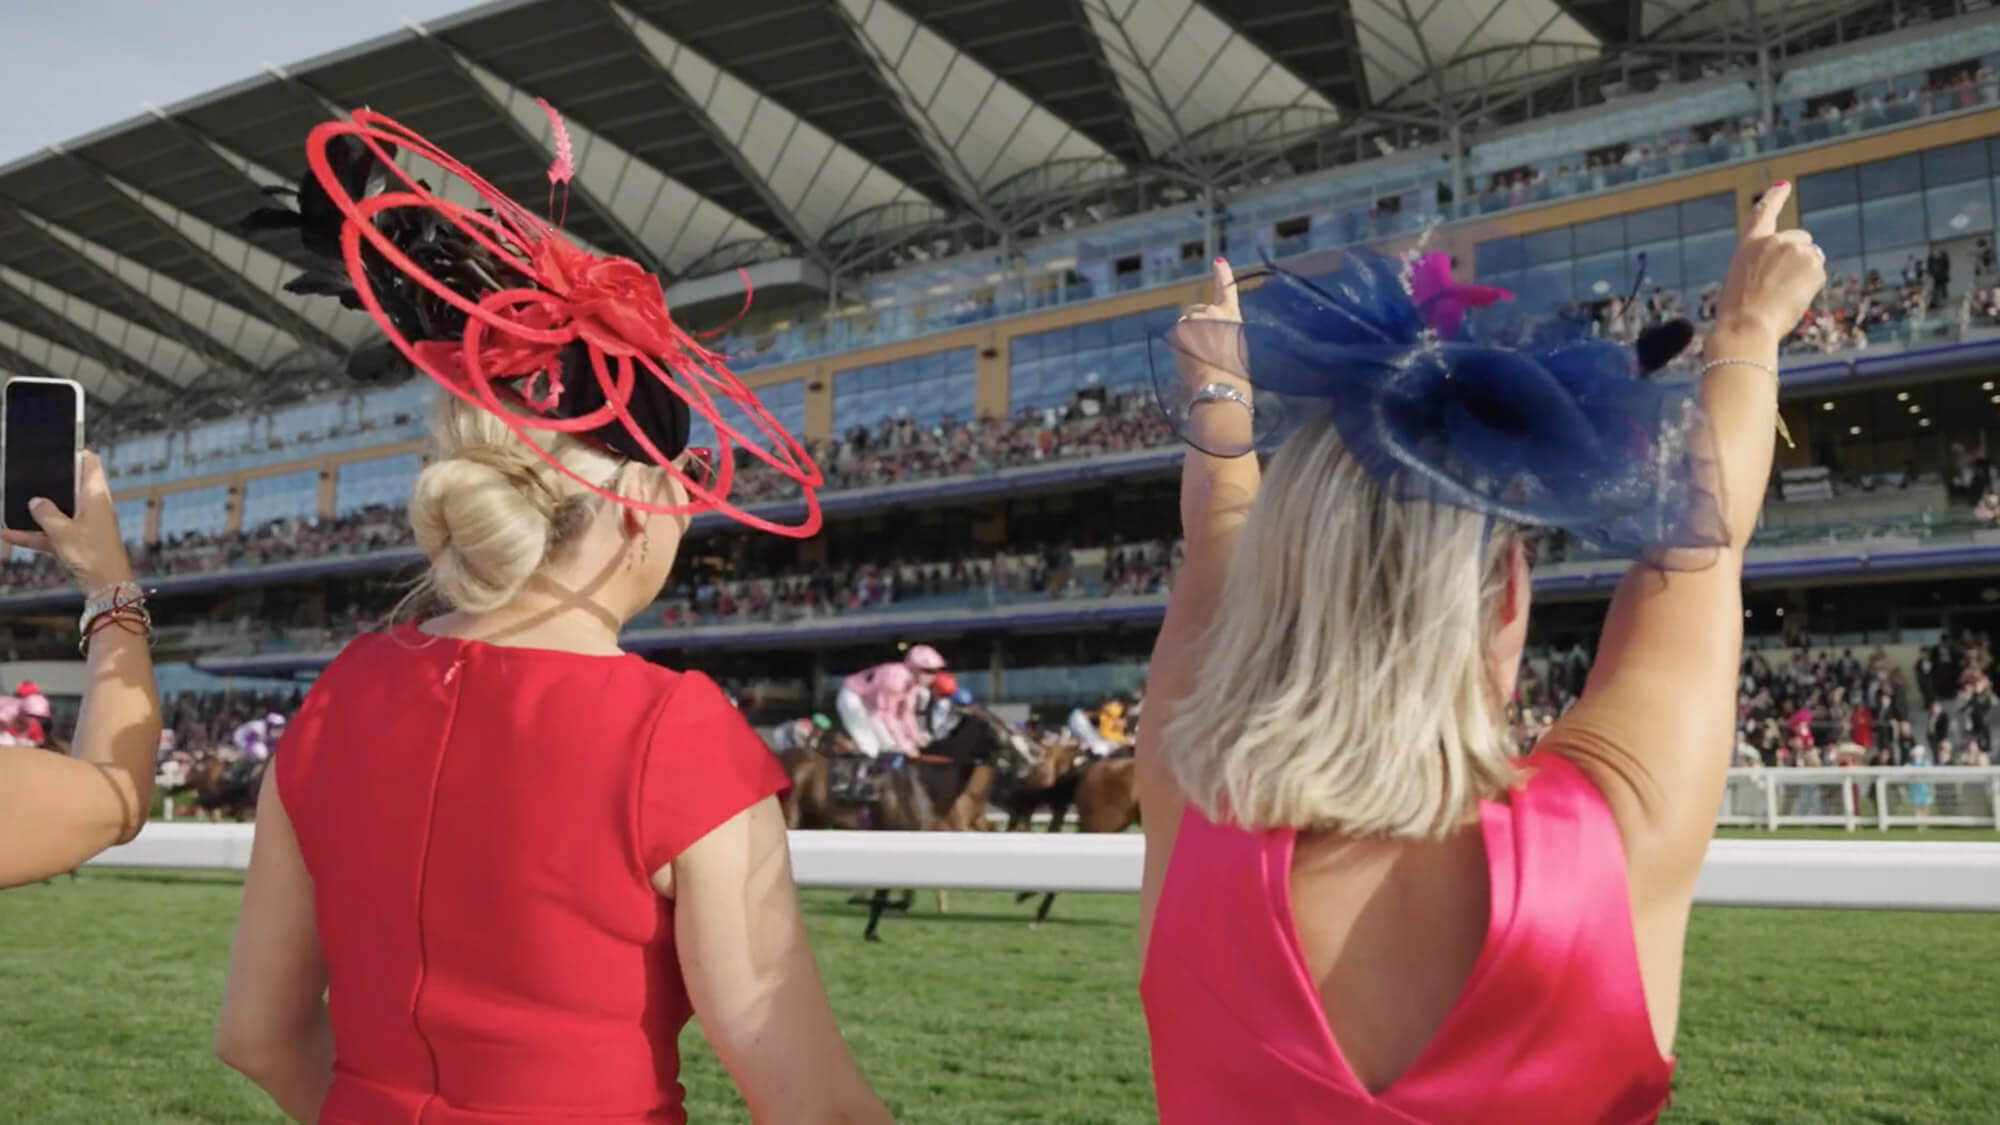 A still image of two spectators dressed up for Race Day watching a horse race